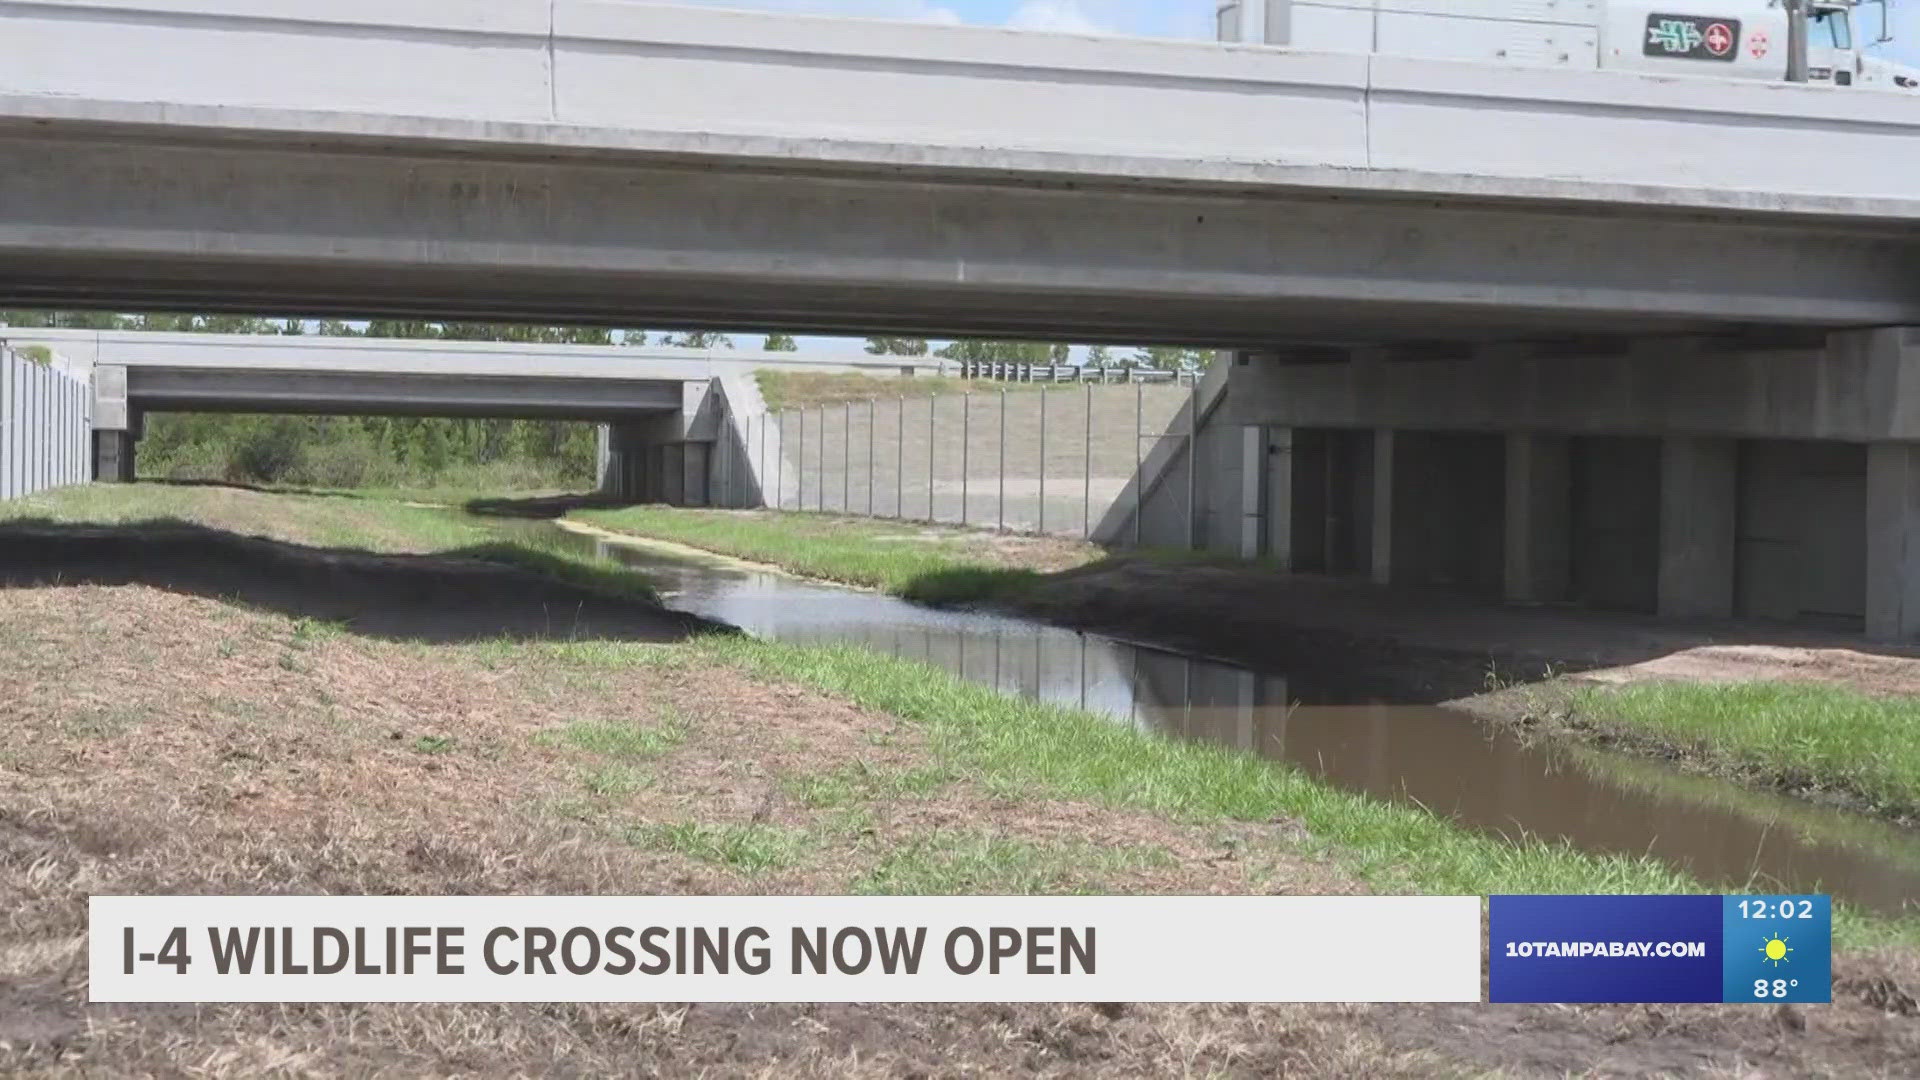 The Florida Department of Transportations opened a one-of-a-kind wildlife crossing to allow animals to cross underneath I-4.